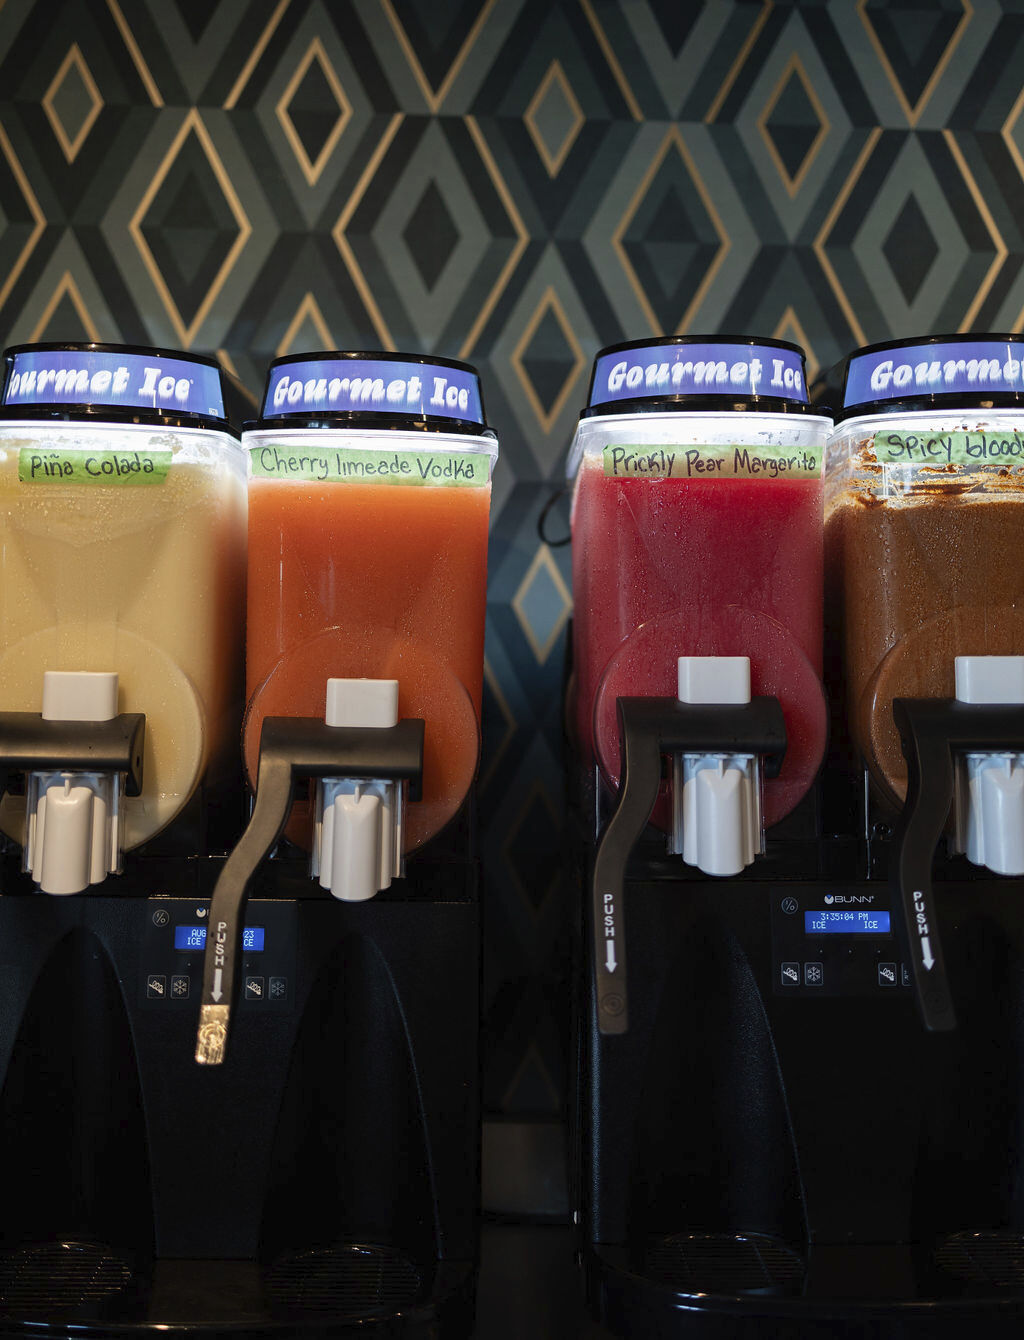 Photo captures four juice jars with taps, providing customer convenience in an appealing display.